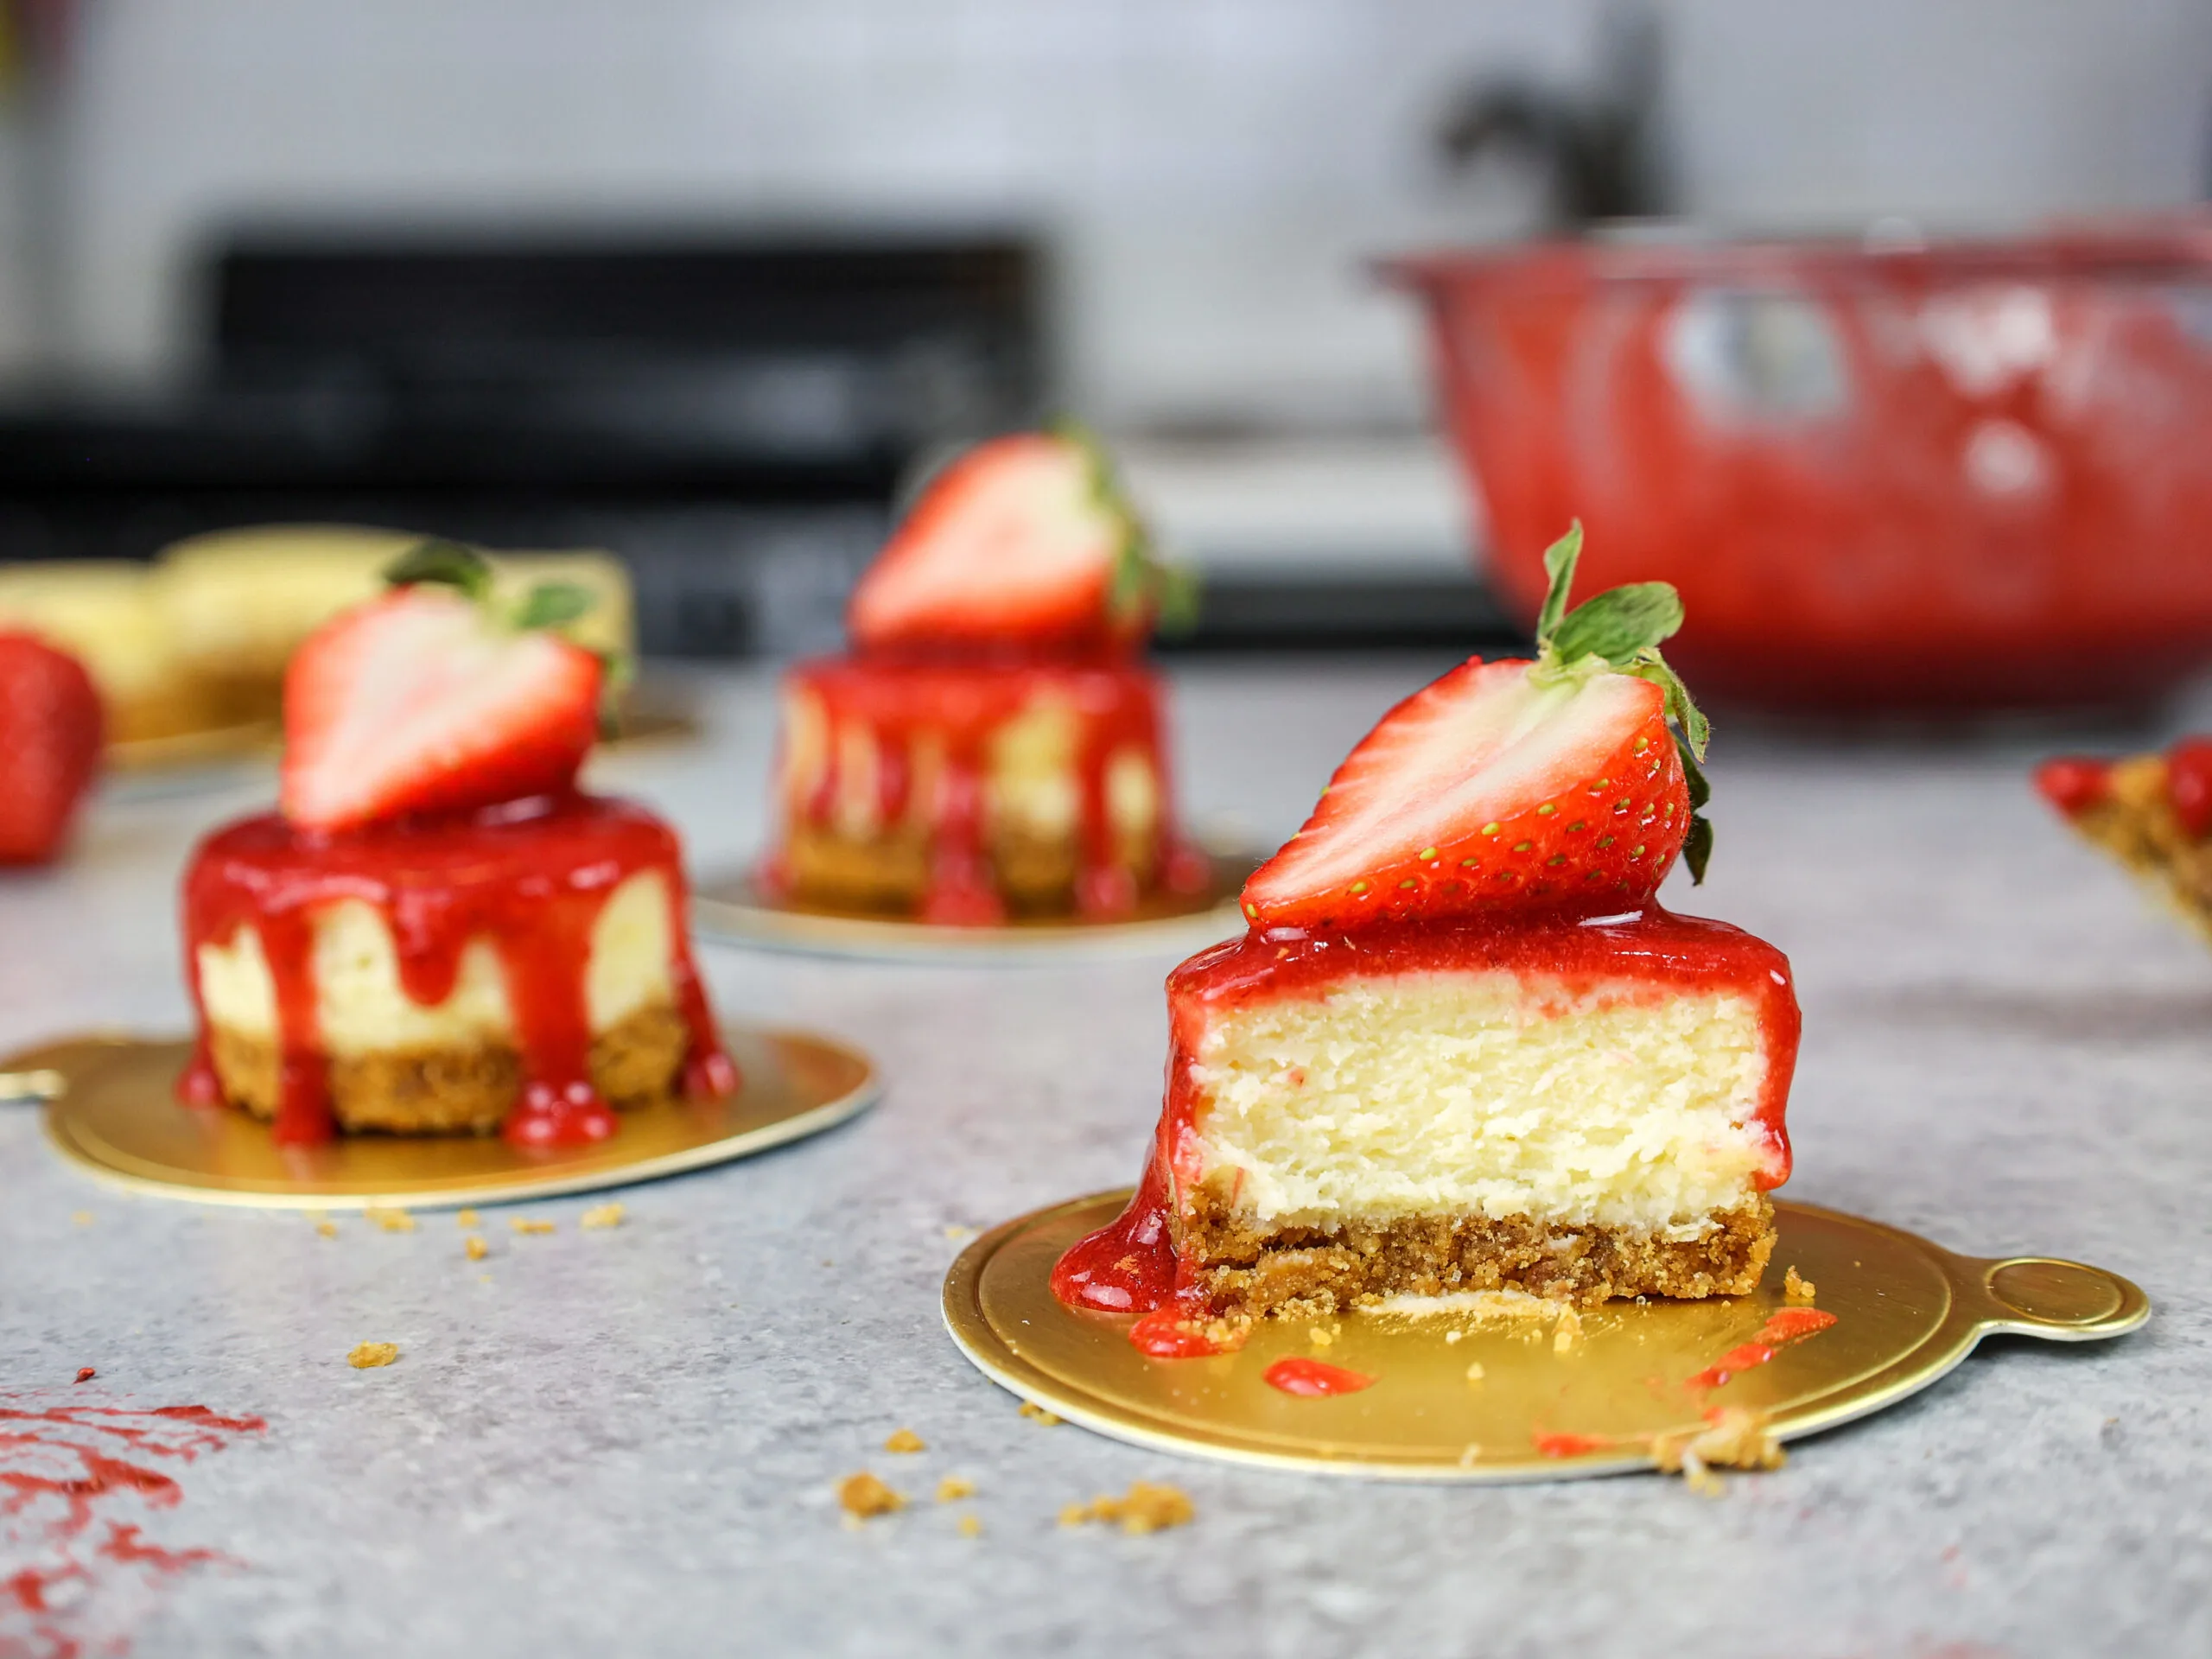 image of a mini strawberry cheesecake that's been cut into to show how creamy and fluffy it is